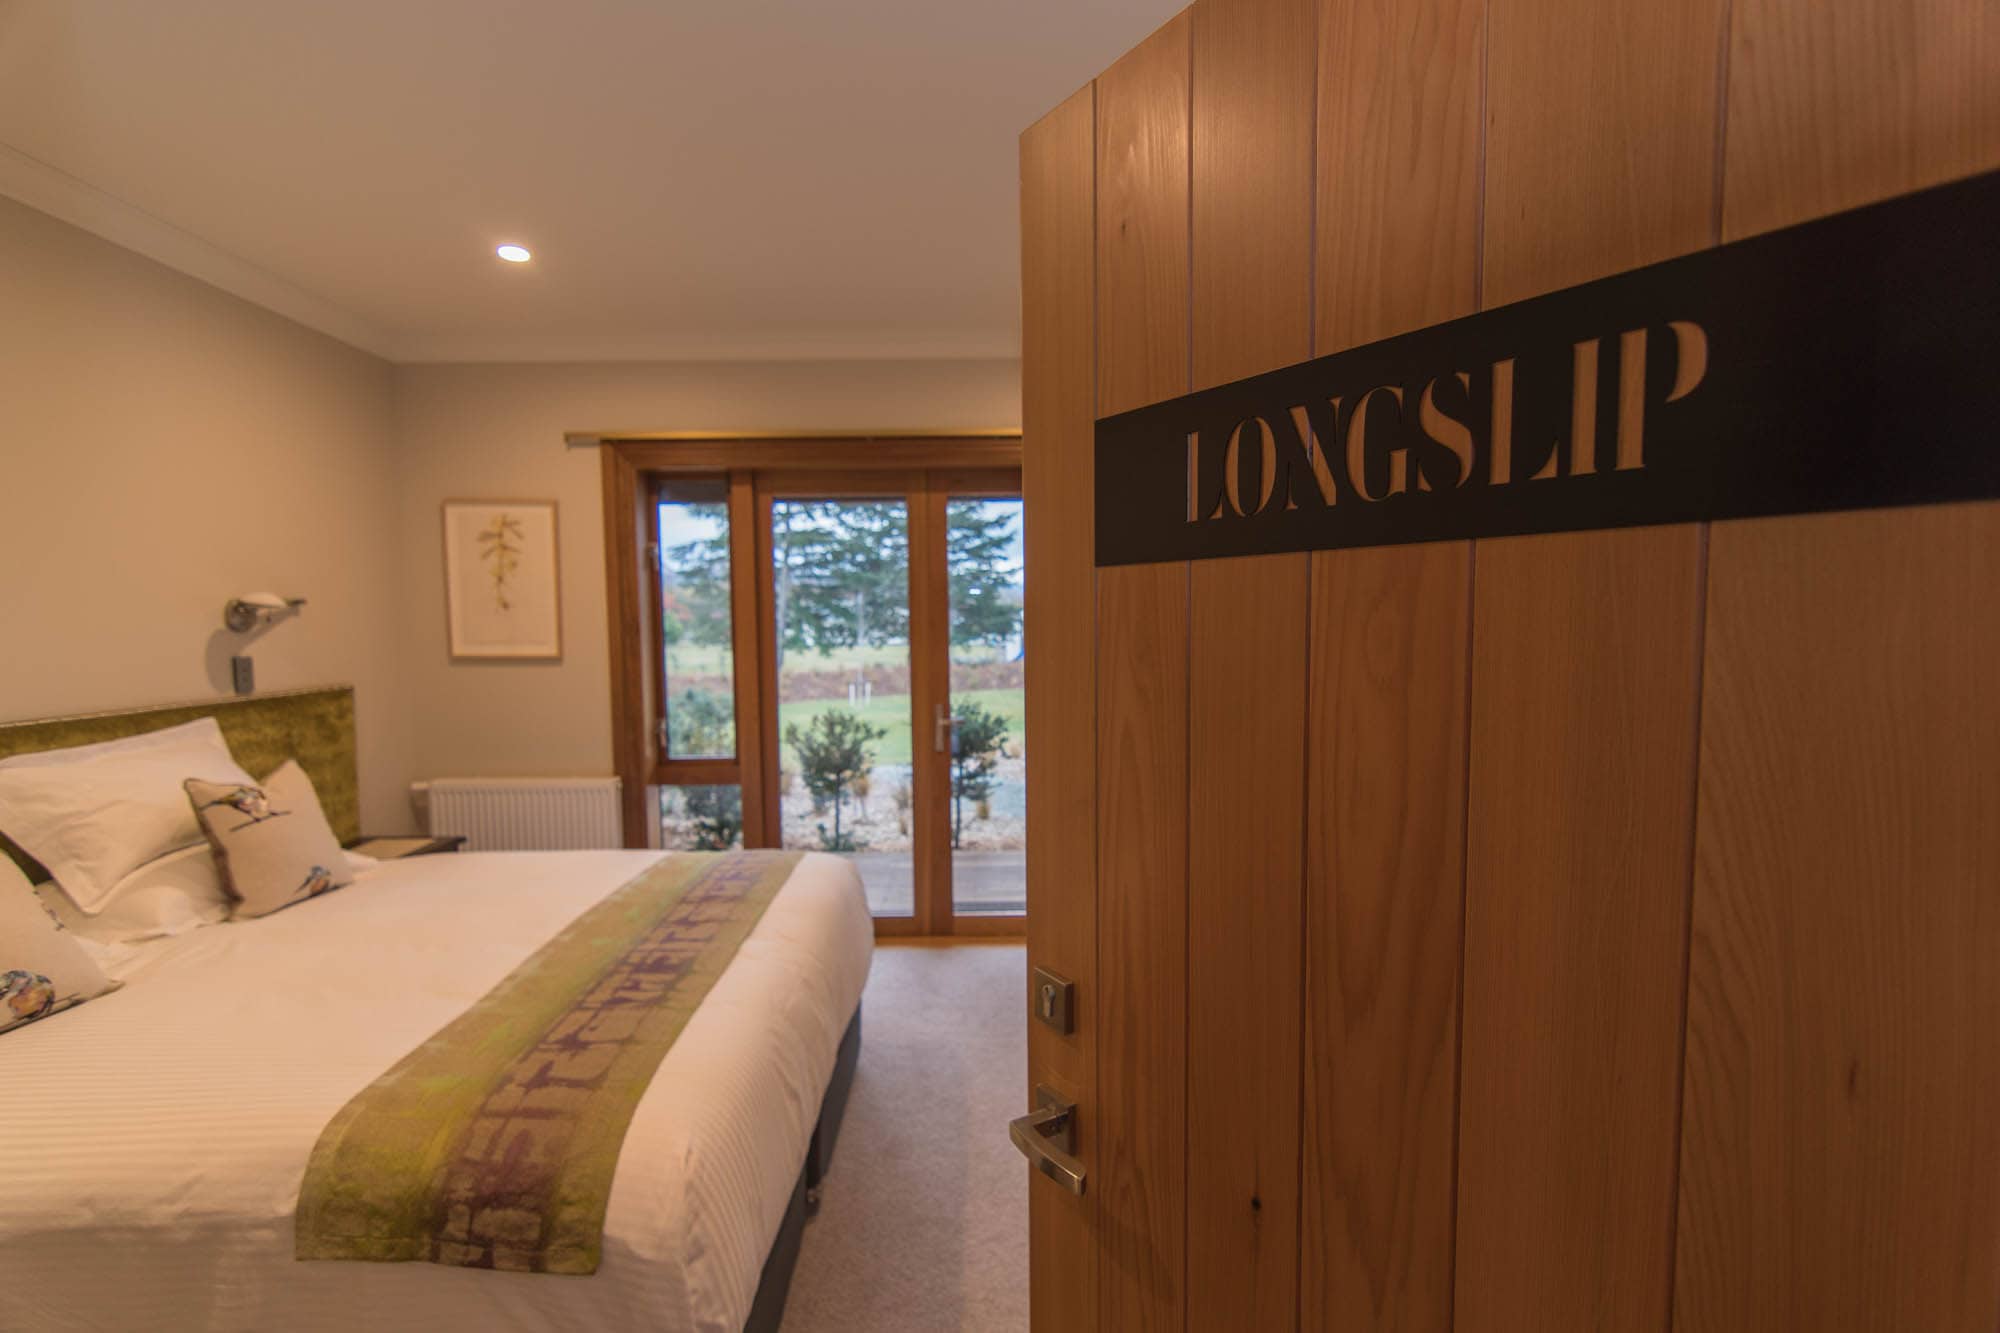 The wool bale stencil names each individual room.